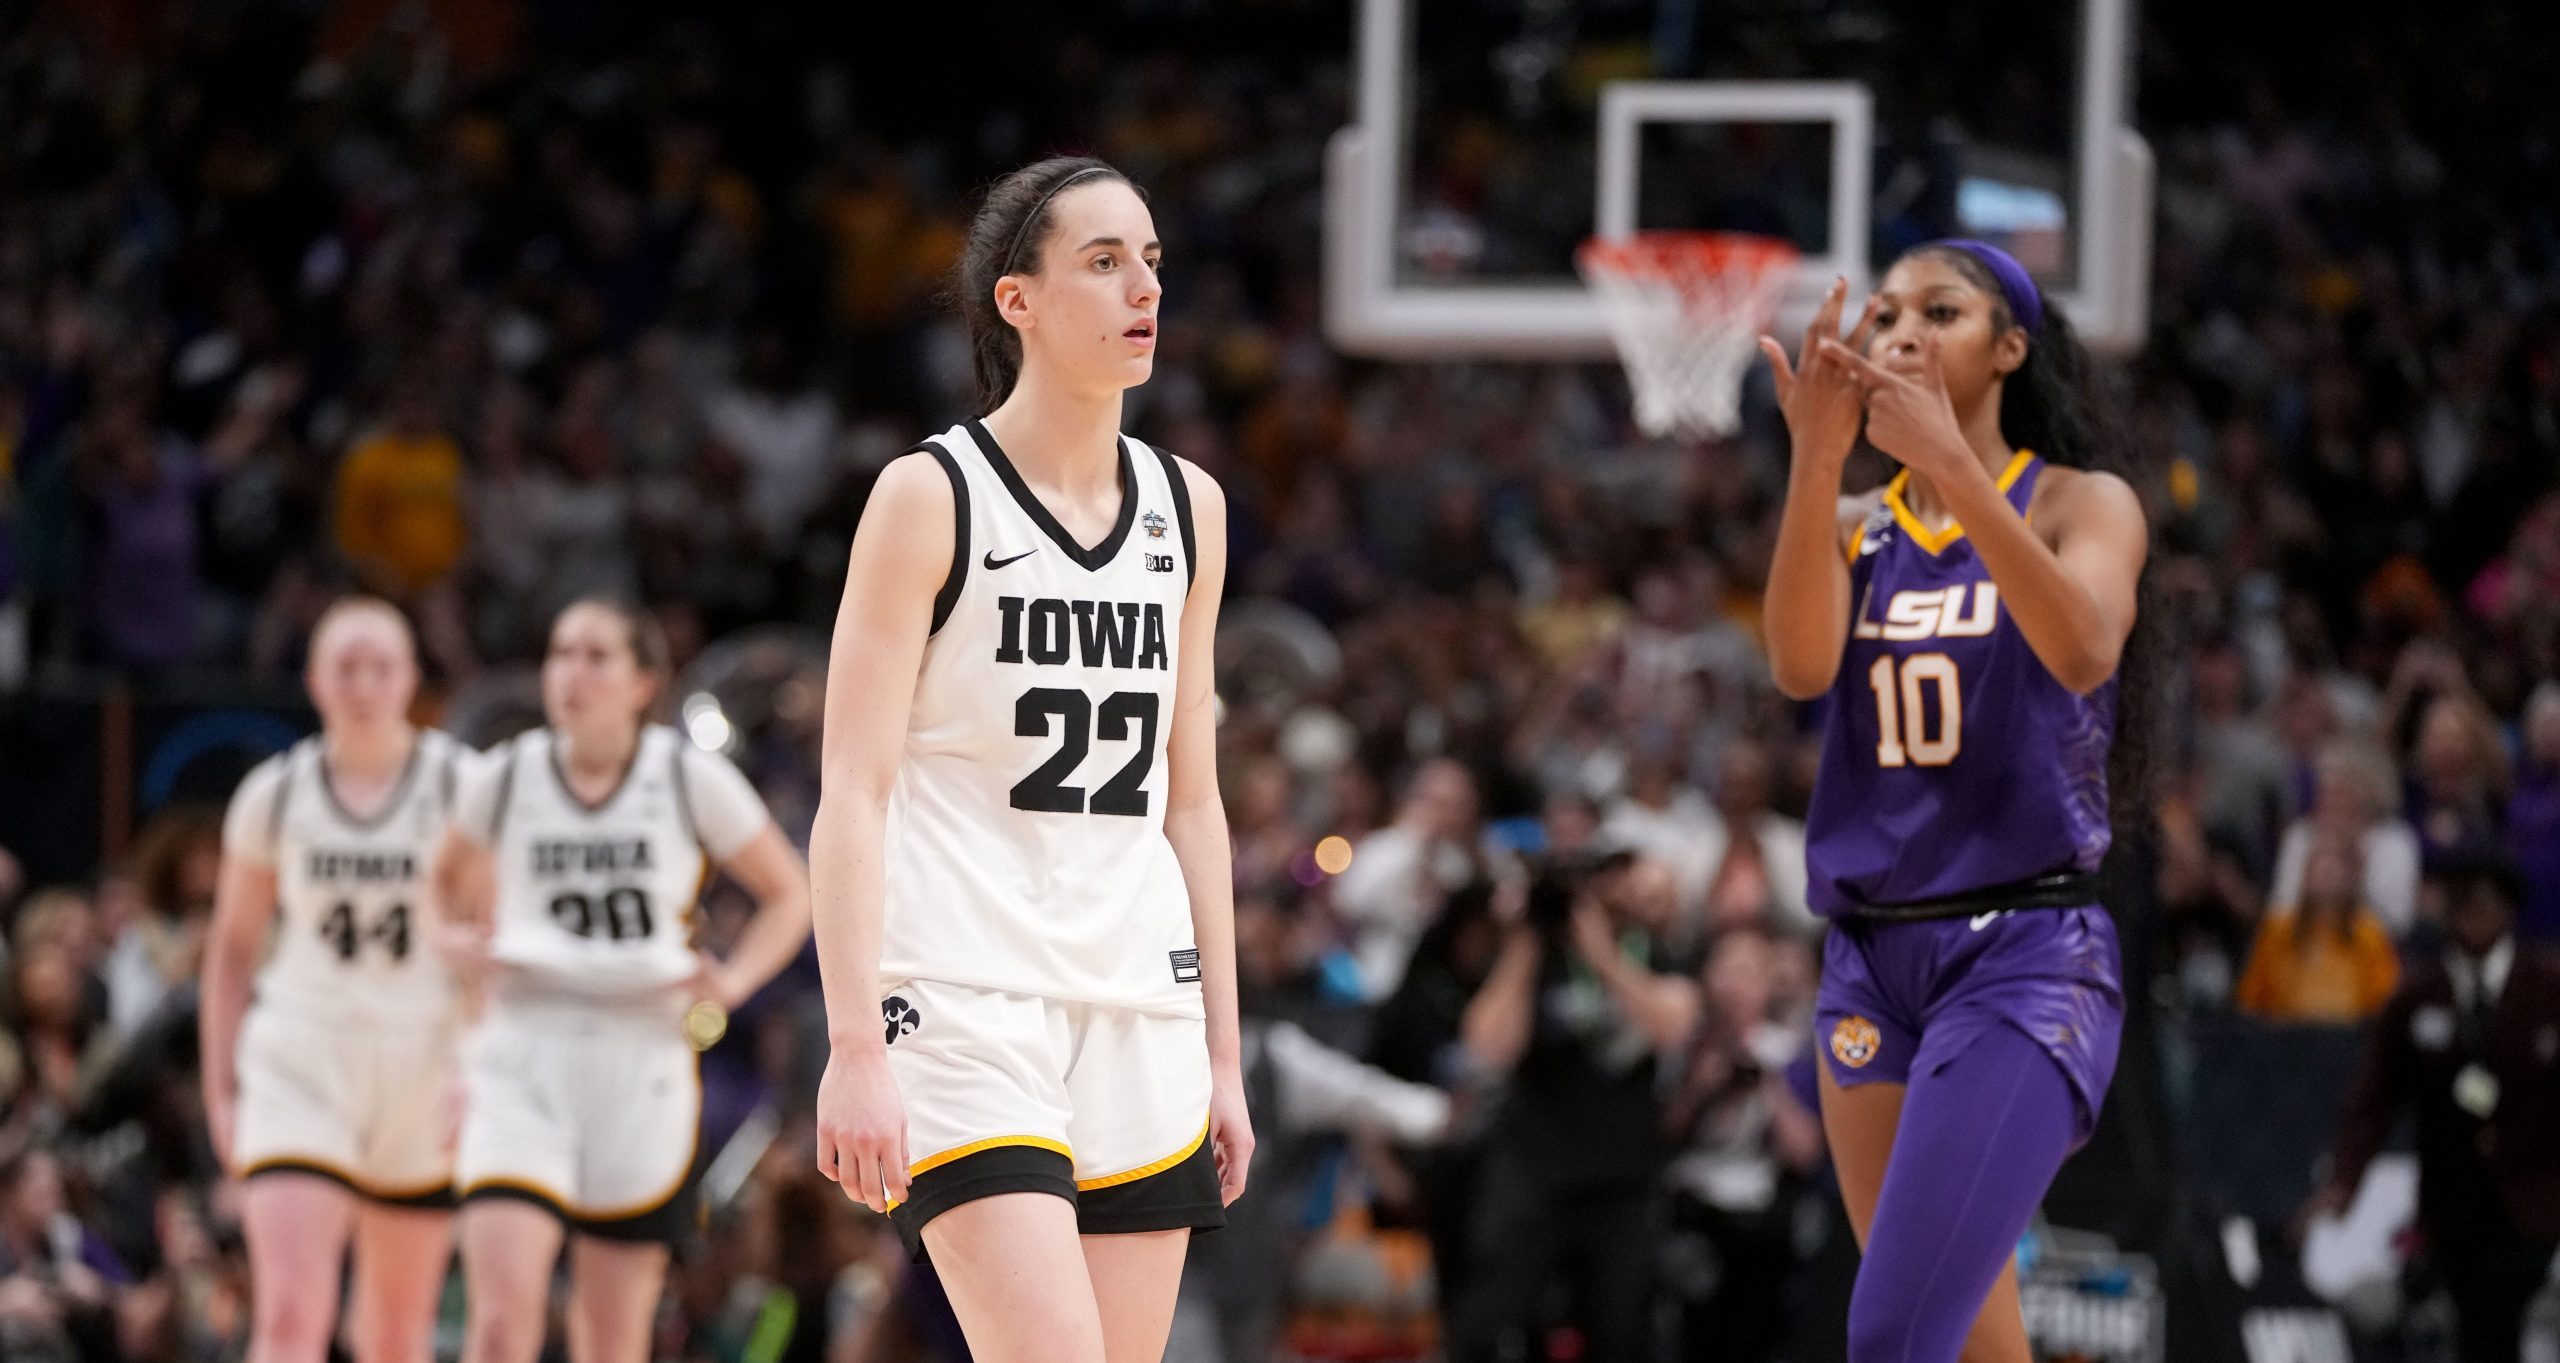 LSU forward Angel Reese (10) shows Iowa guard Caitlin Clark (22) her ring finger